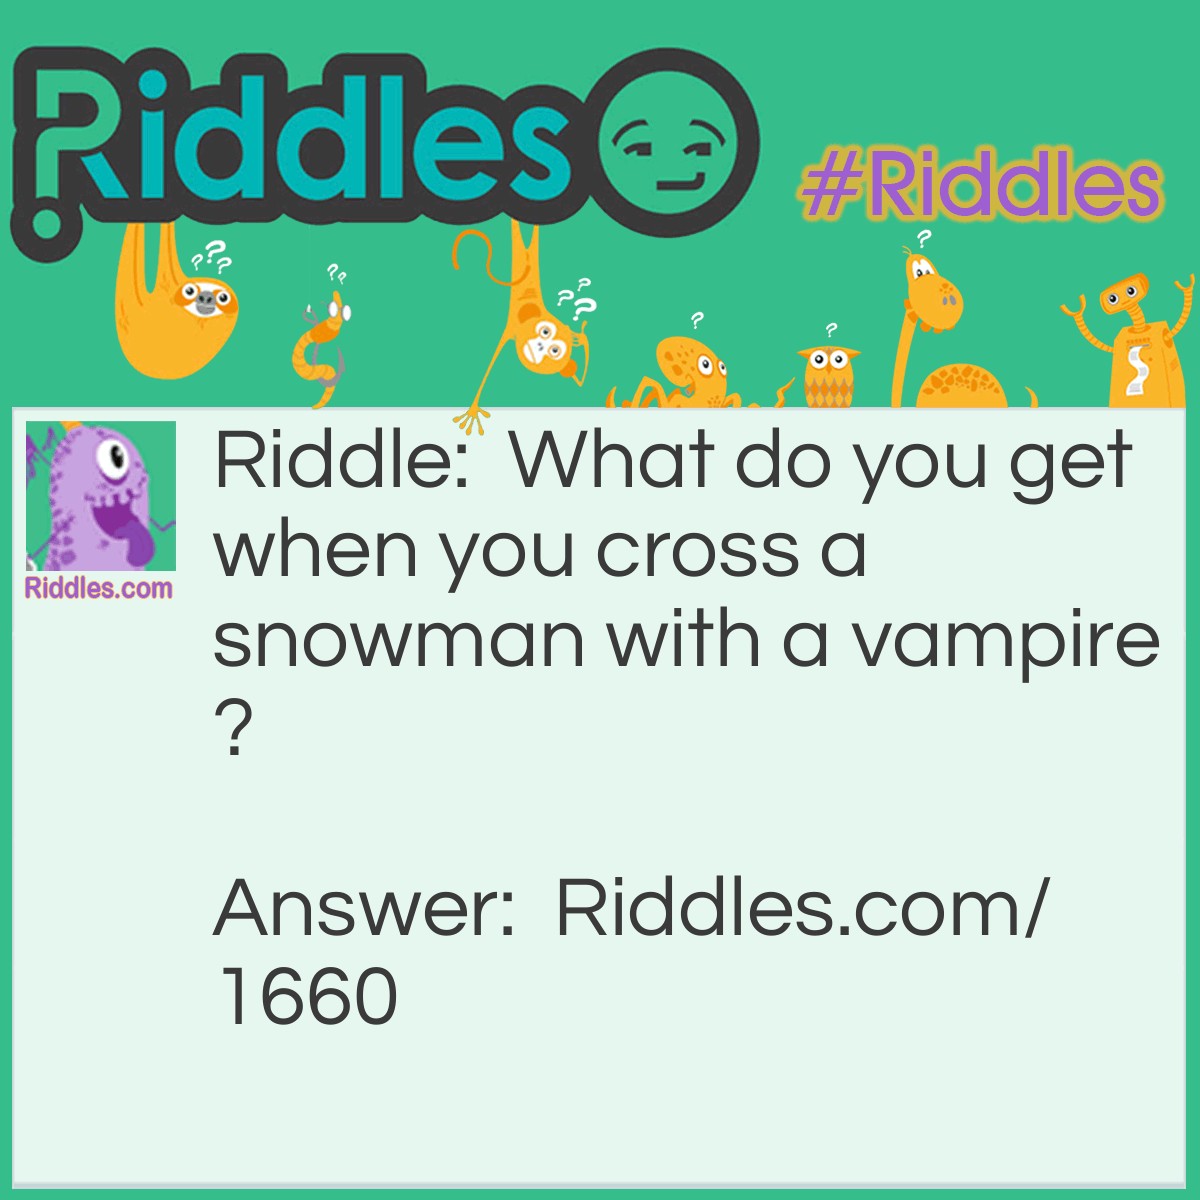 Riddle: What do you get when you cross a snowman with a vampire? Answer: Frostbite.